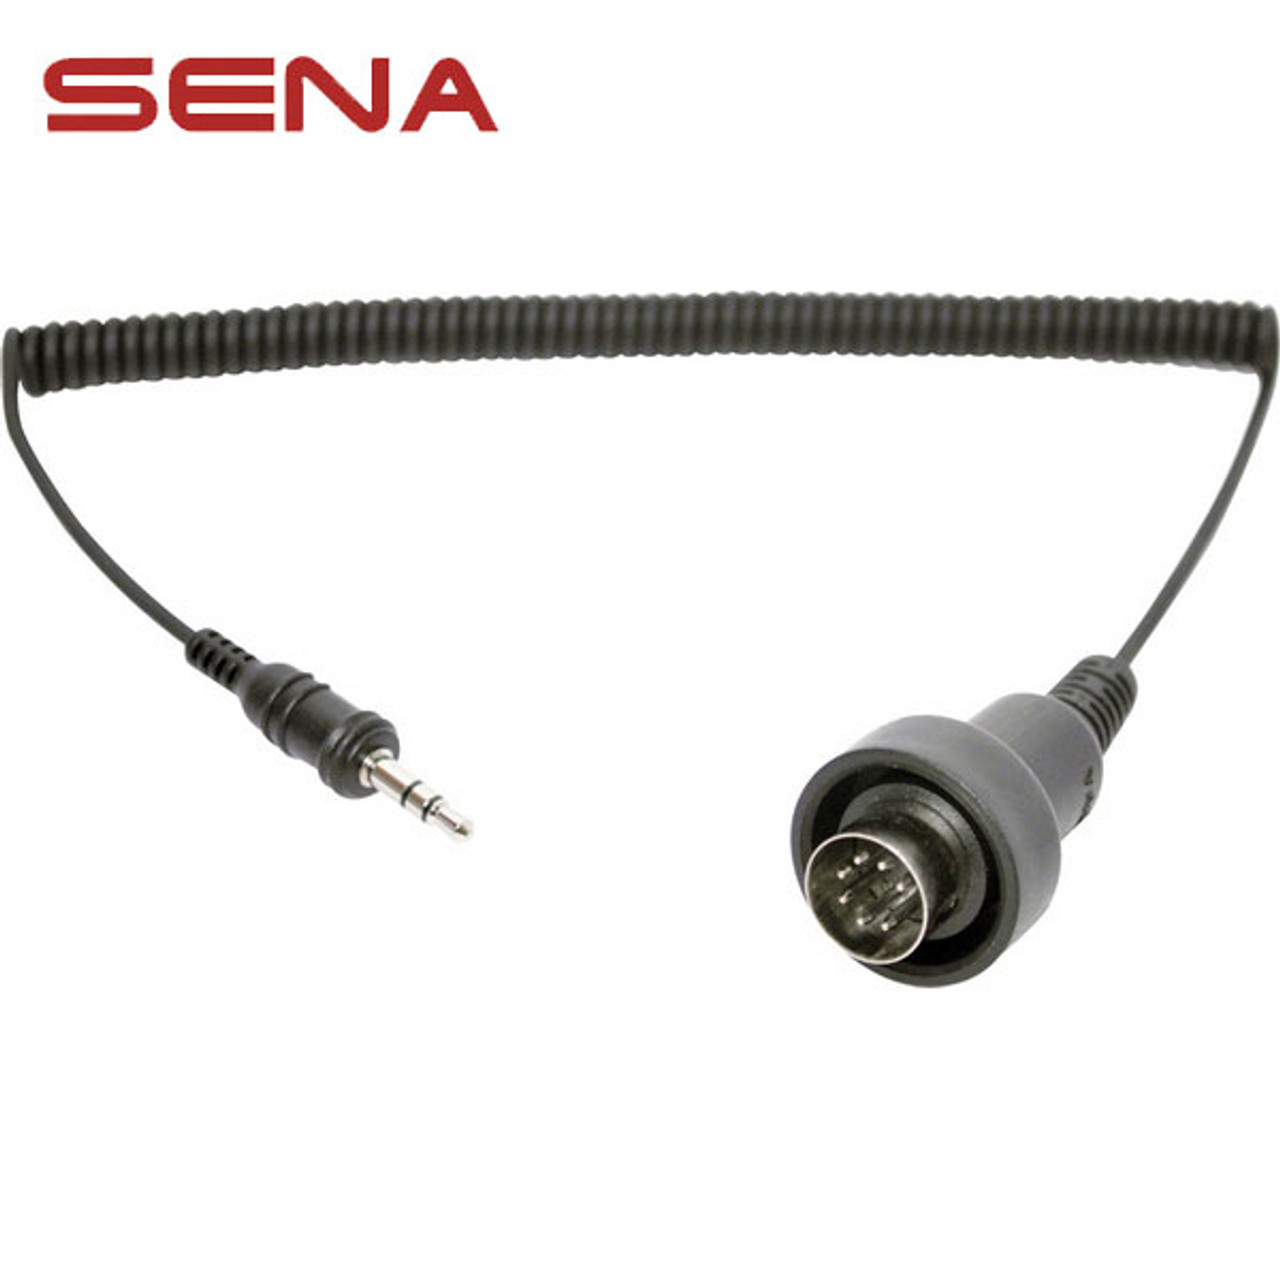 Sena Stereo Jack 3.5Mm To 7 Pin Din Cable - Sportbike Track Gear